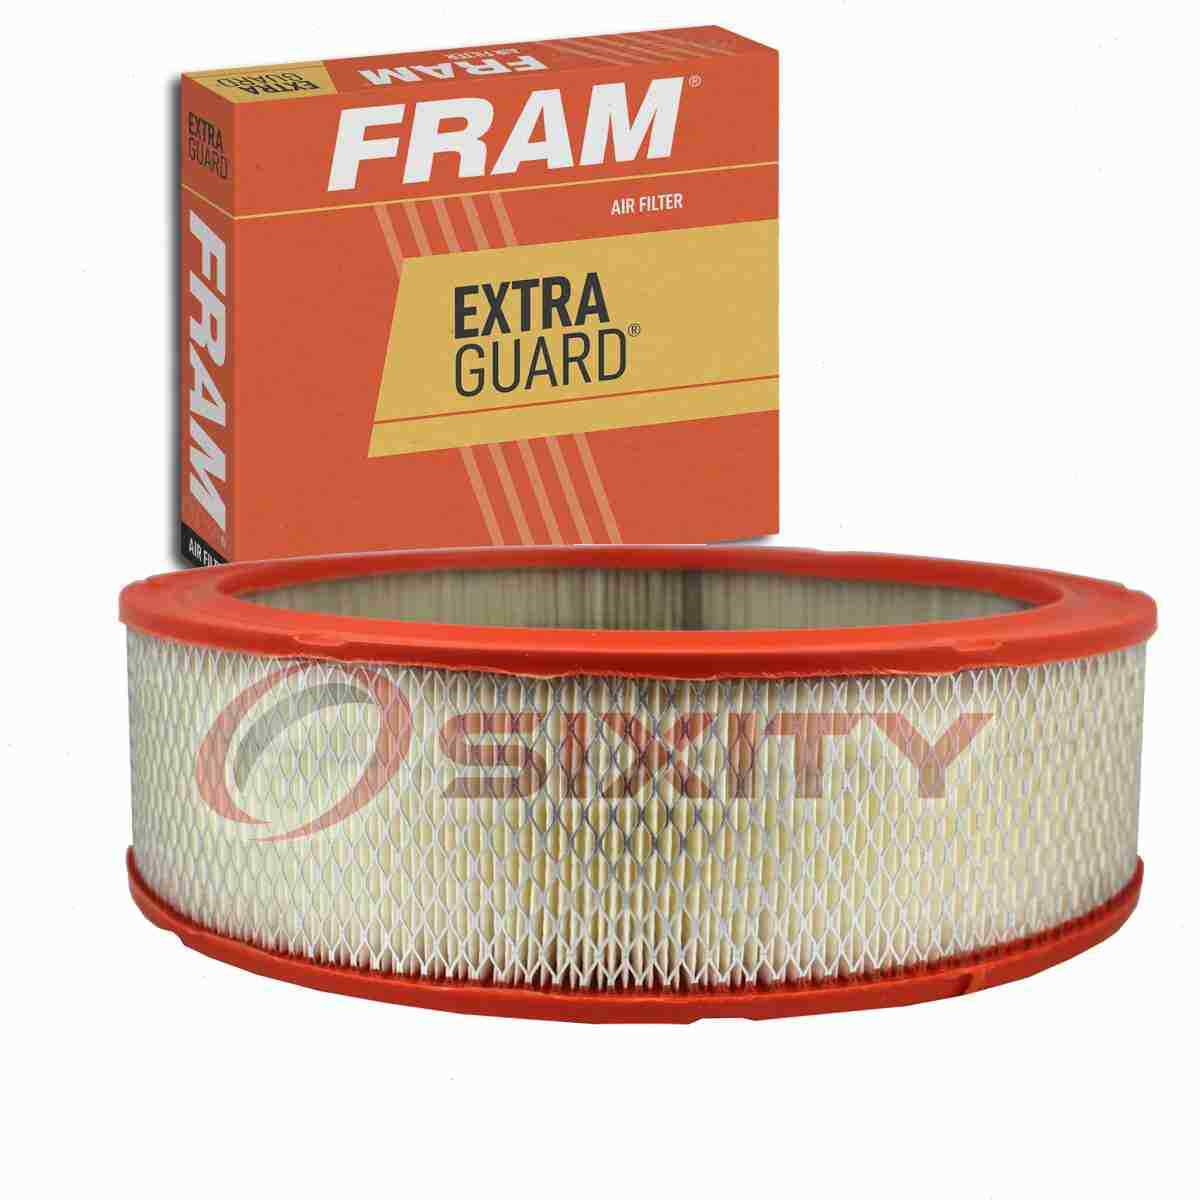 FRAM Extra Guard Air Filter for 1968-1969 Pontiac Beaumont Intake Inlet rx